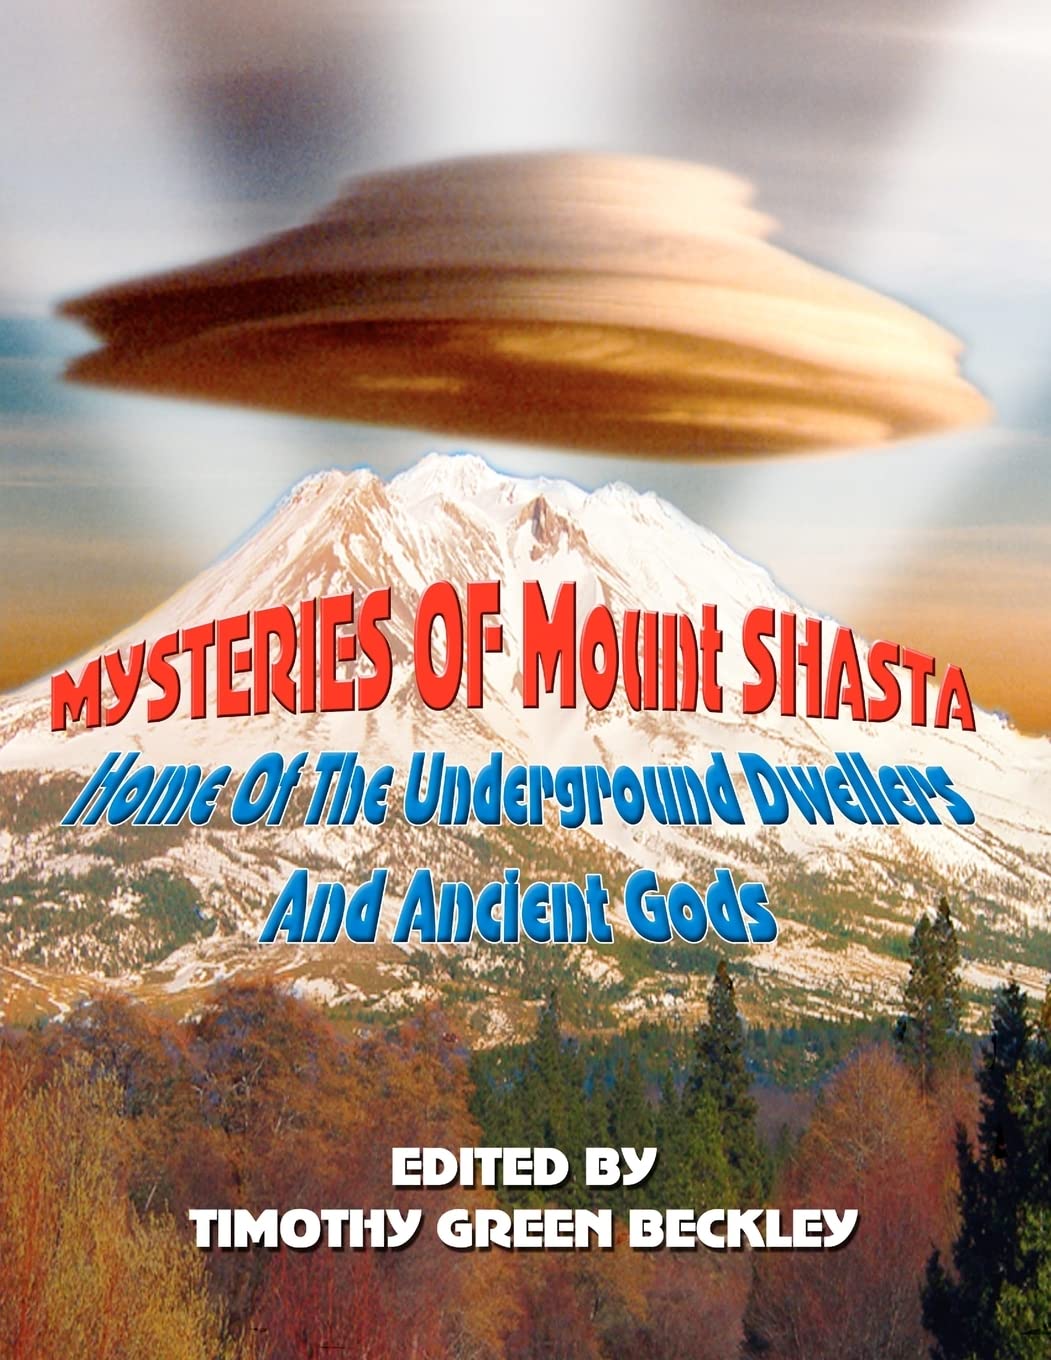 Mysteries of Mount Shasta: Home Of The Underground Dwellers and Ancient Gods Paperback – January 5, 2012